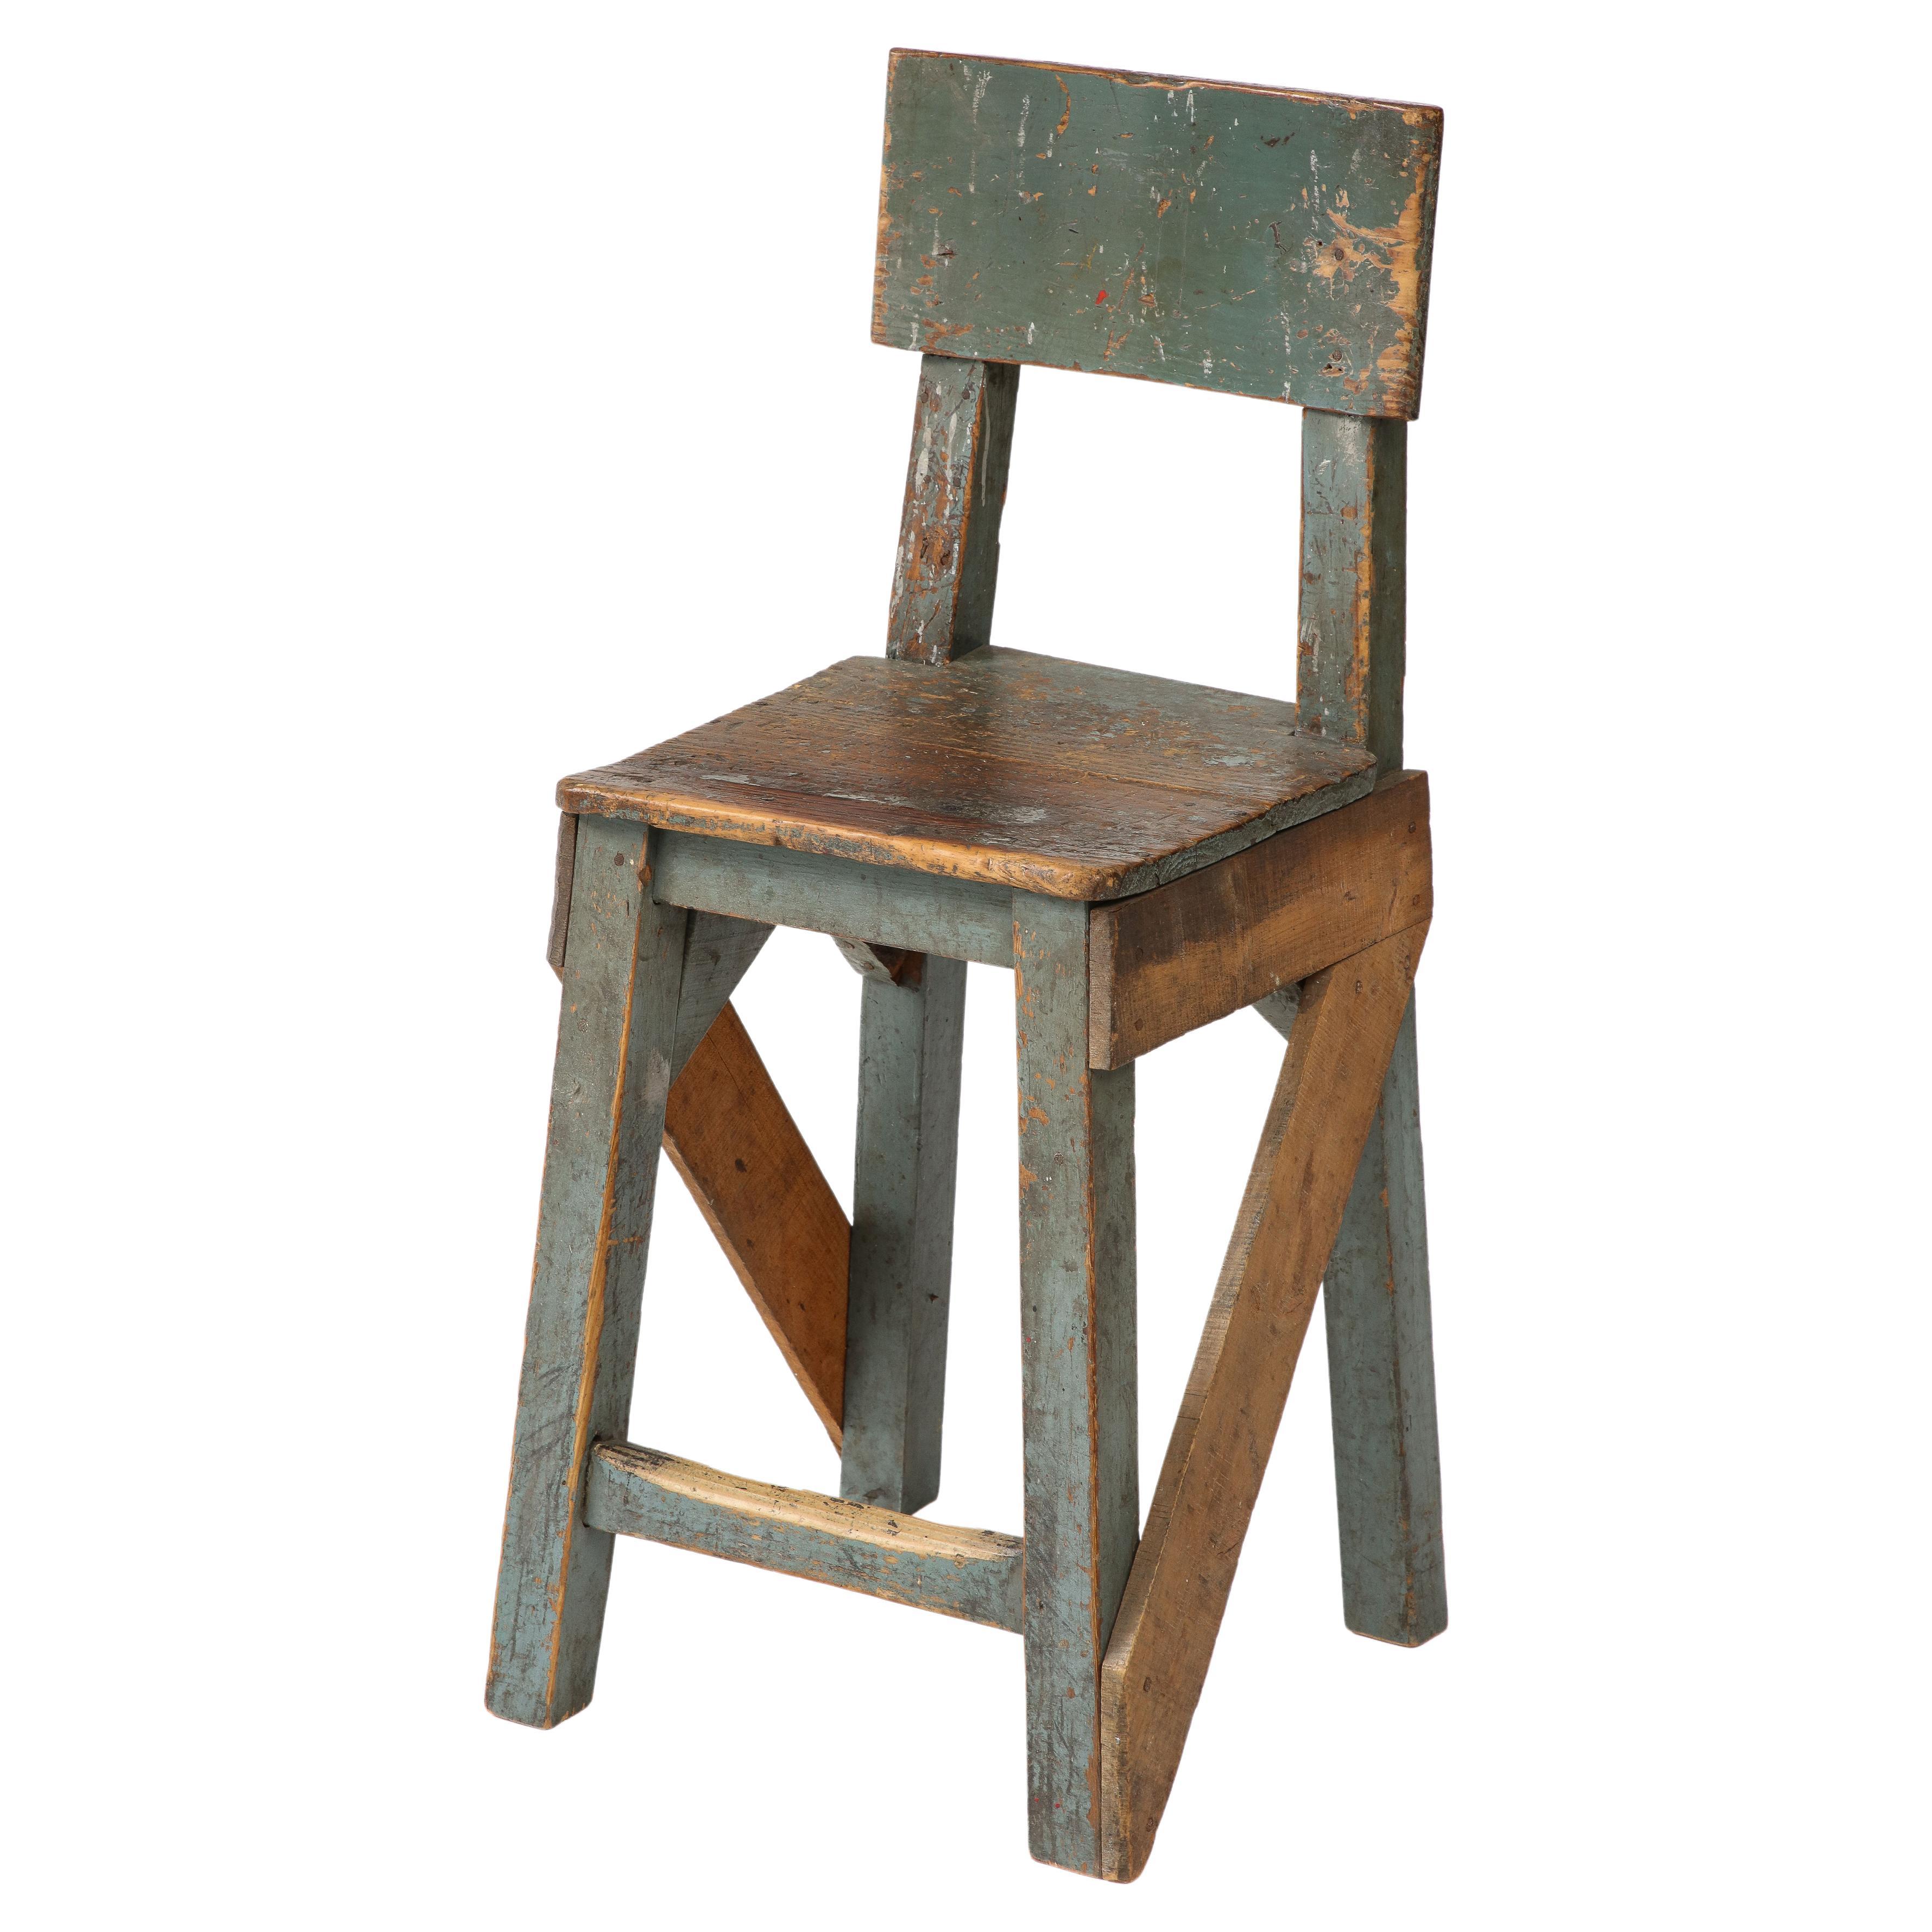 French Primitive Artist’s Chair, c. 1950 For Sale